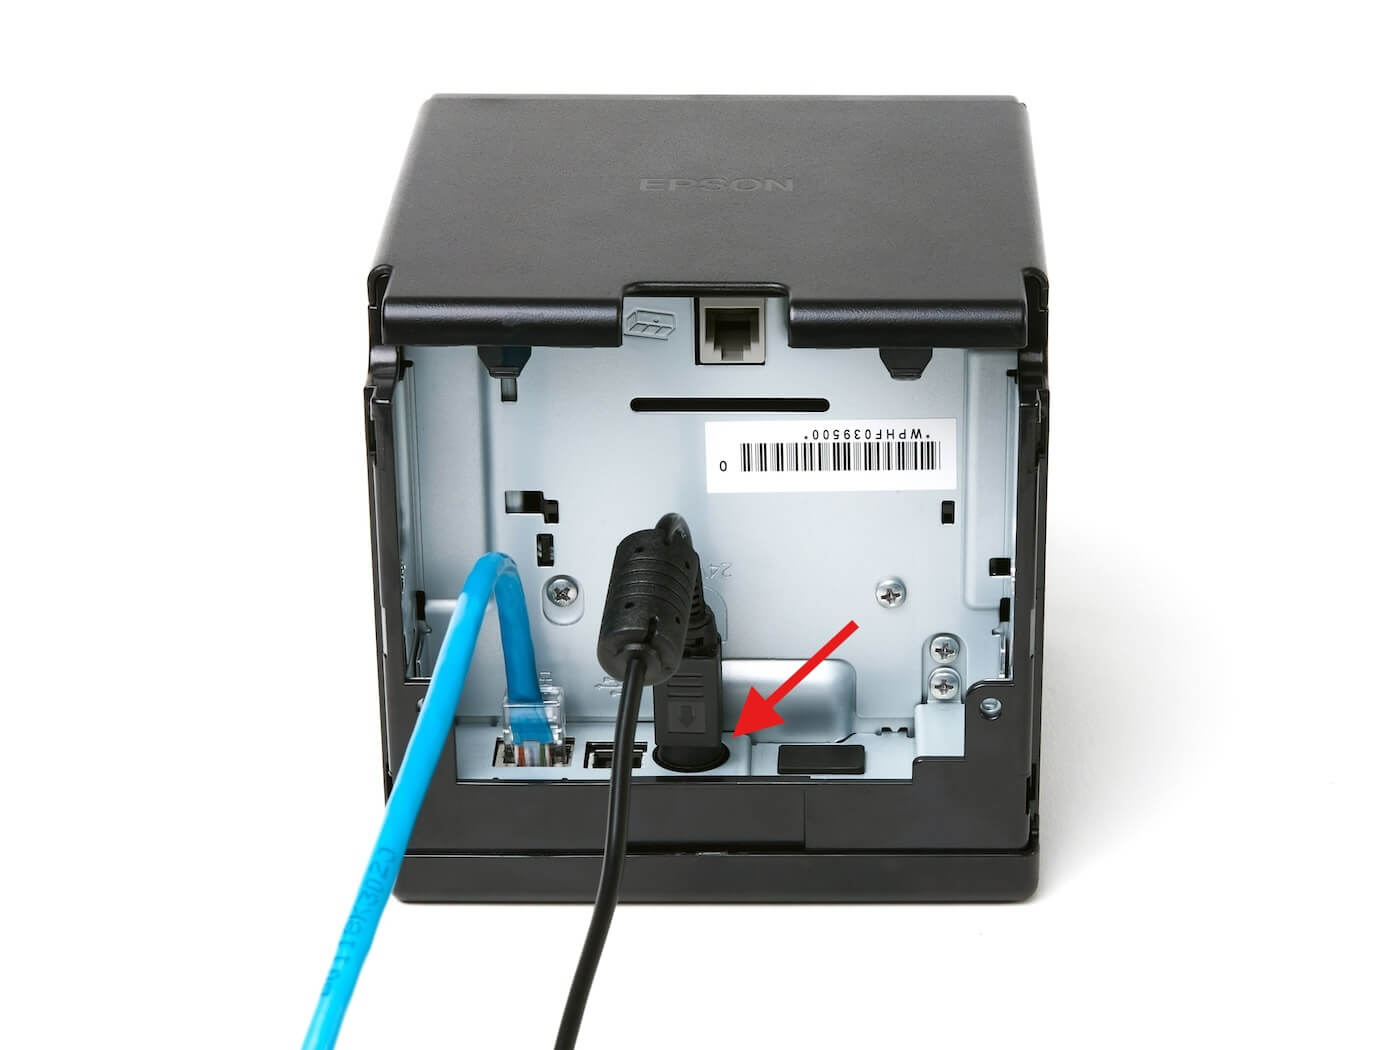 TM-m30II printer with annotation highlighted power cable plugged in.